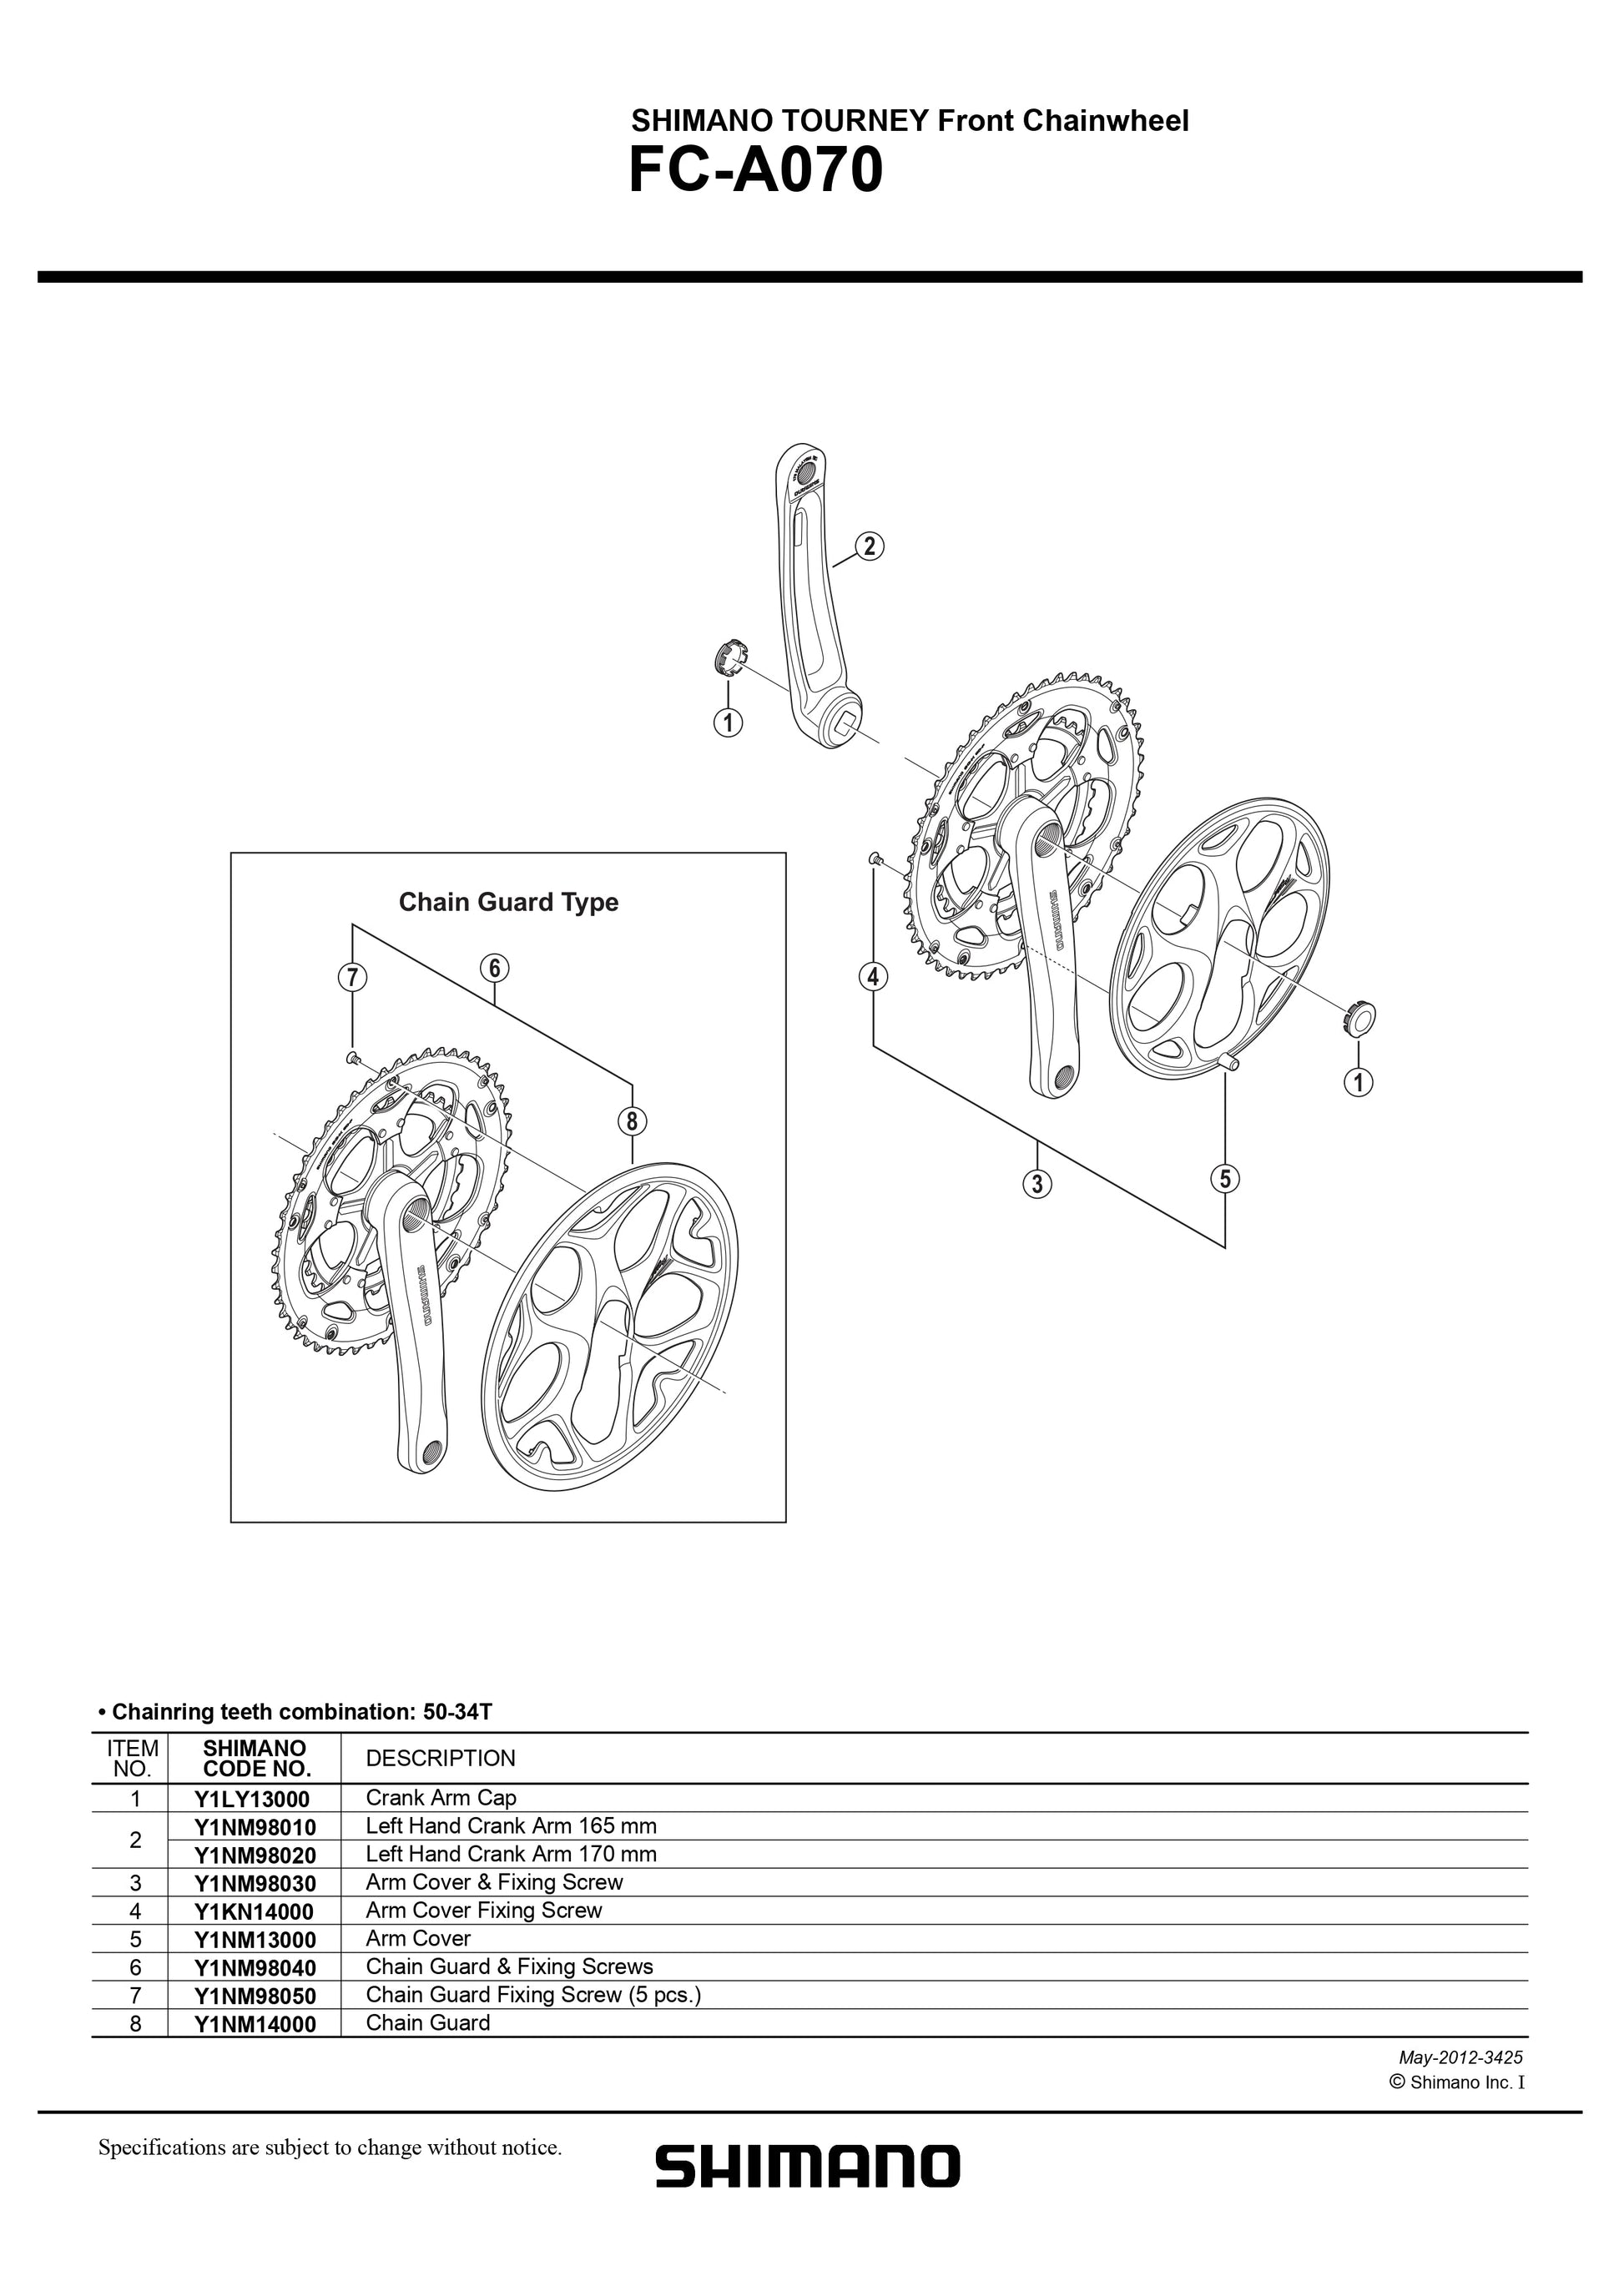 SHIMANO Tourney FC-A070 Front Chainwheel Chain Guard and Fixing Screws - Y1NM98040-Pit Crew Cycles